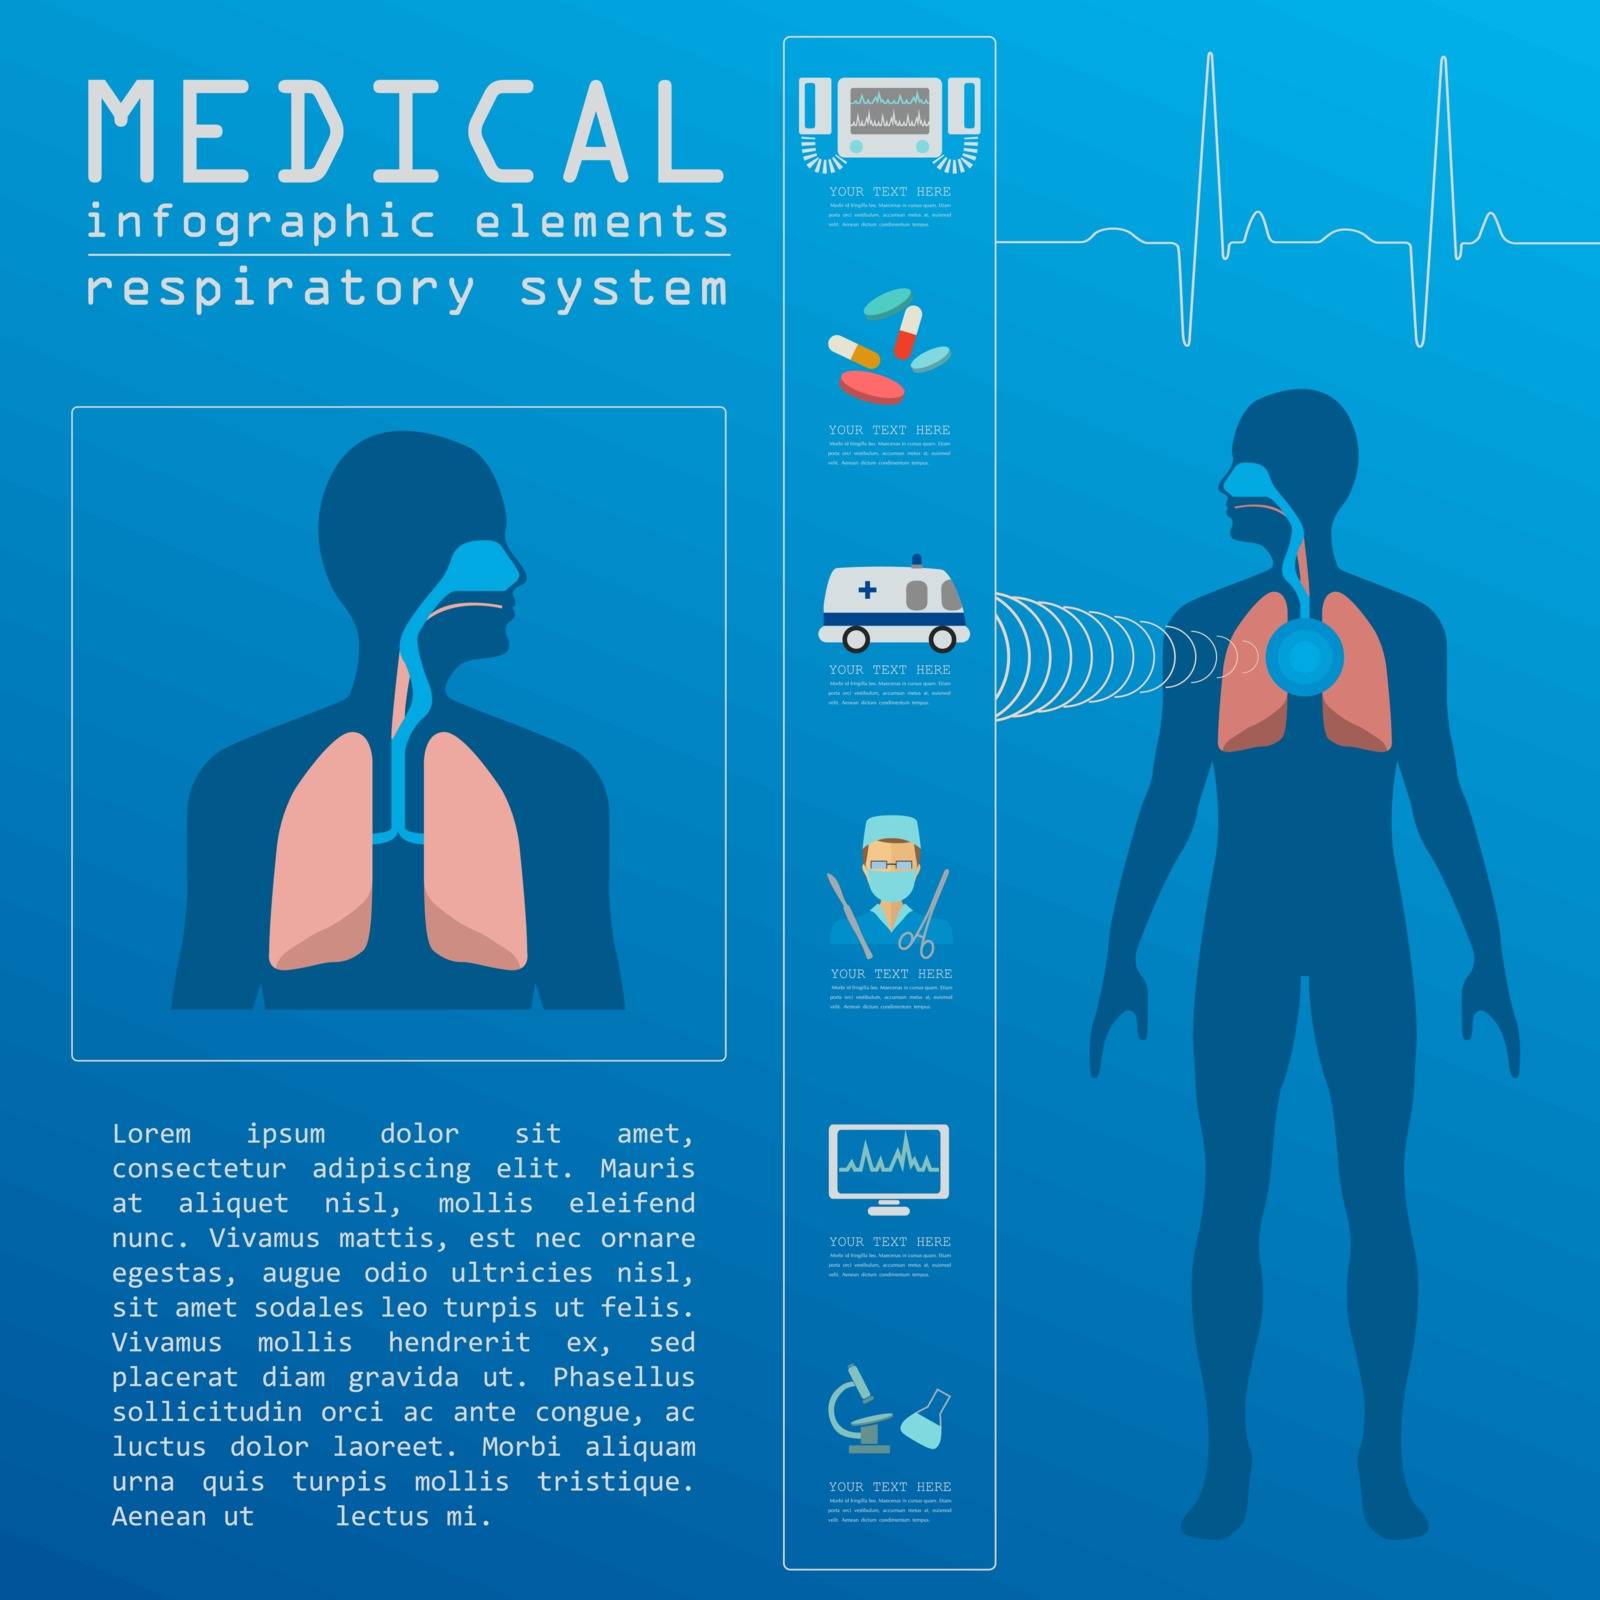 Medical and healthcare infographic, respiratory system infograph by A7880S